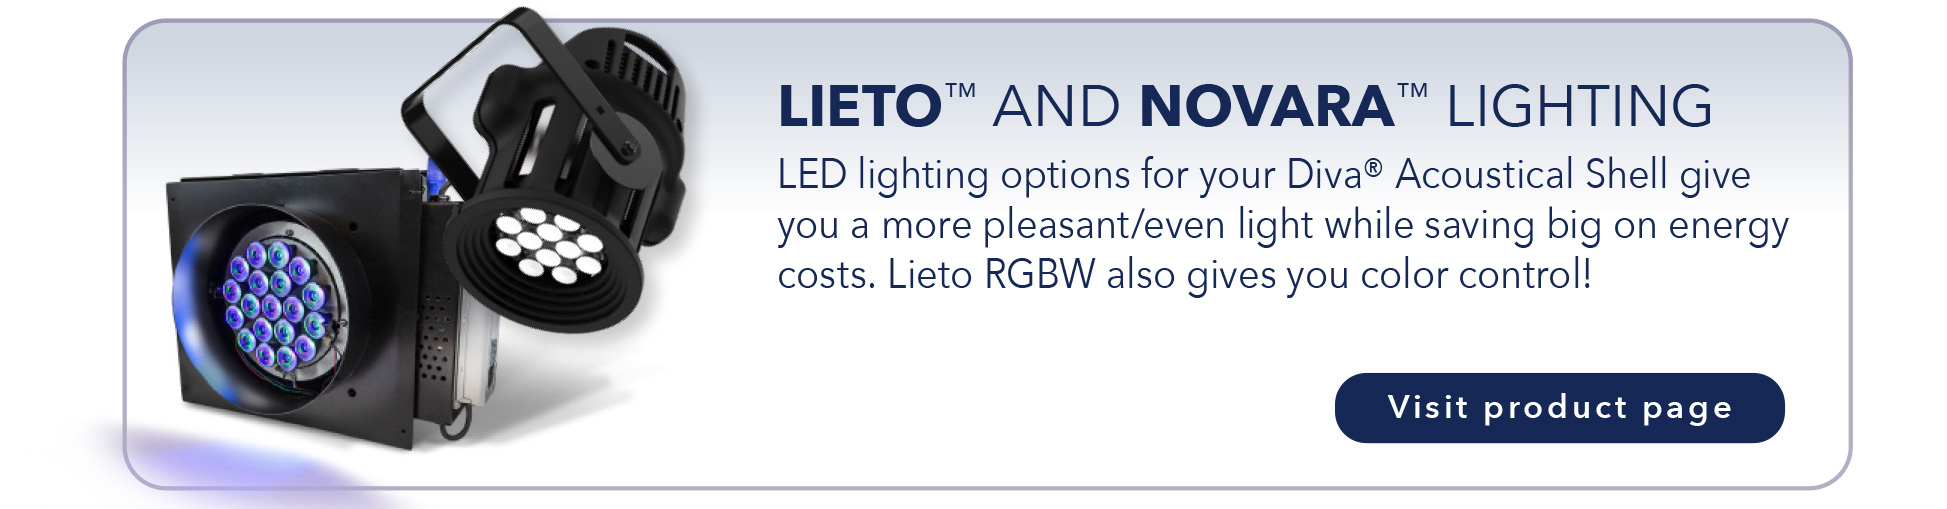 LIETO™ AND NOVARA™ LIGHTING
LED lighting options for your Diva® Acoustical Shell give
you a more pleasant/even light while saving big on energy
costs. Lieto RGBW also gives you color control!